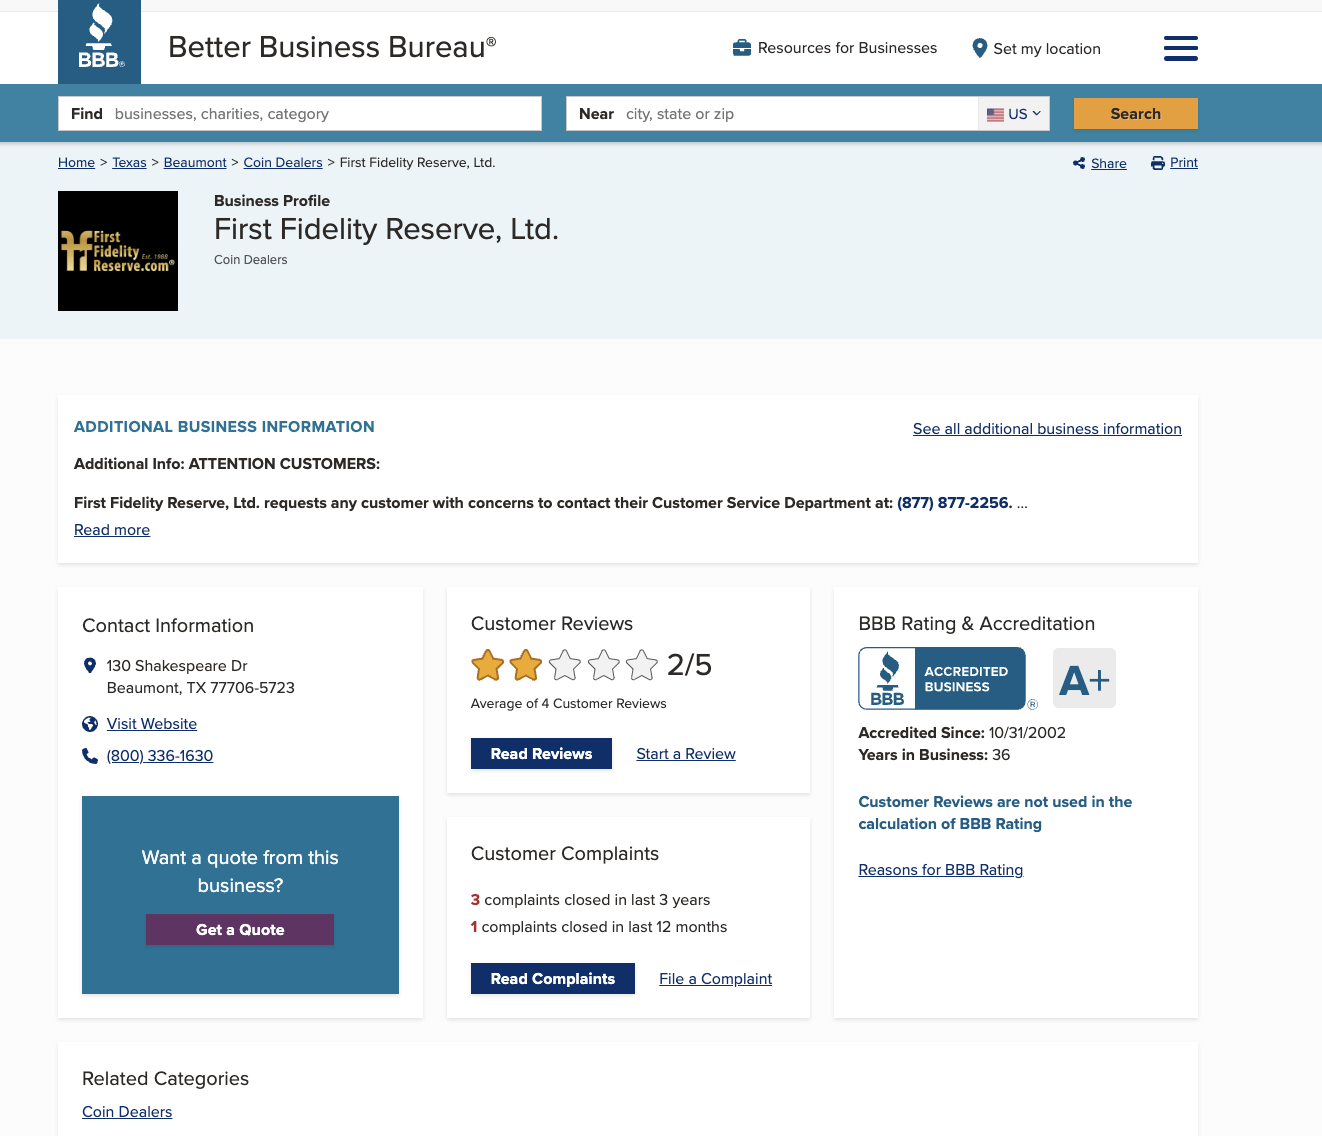 First Fidelity reserve lawsuit and BBB rating